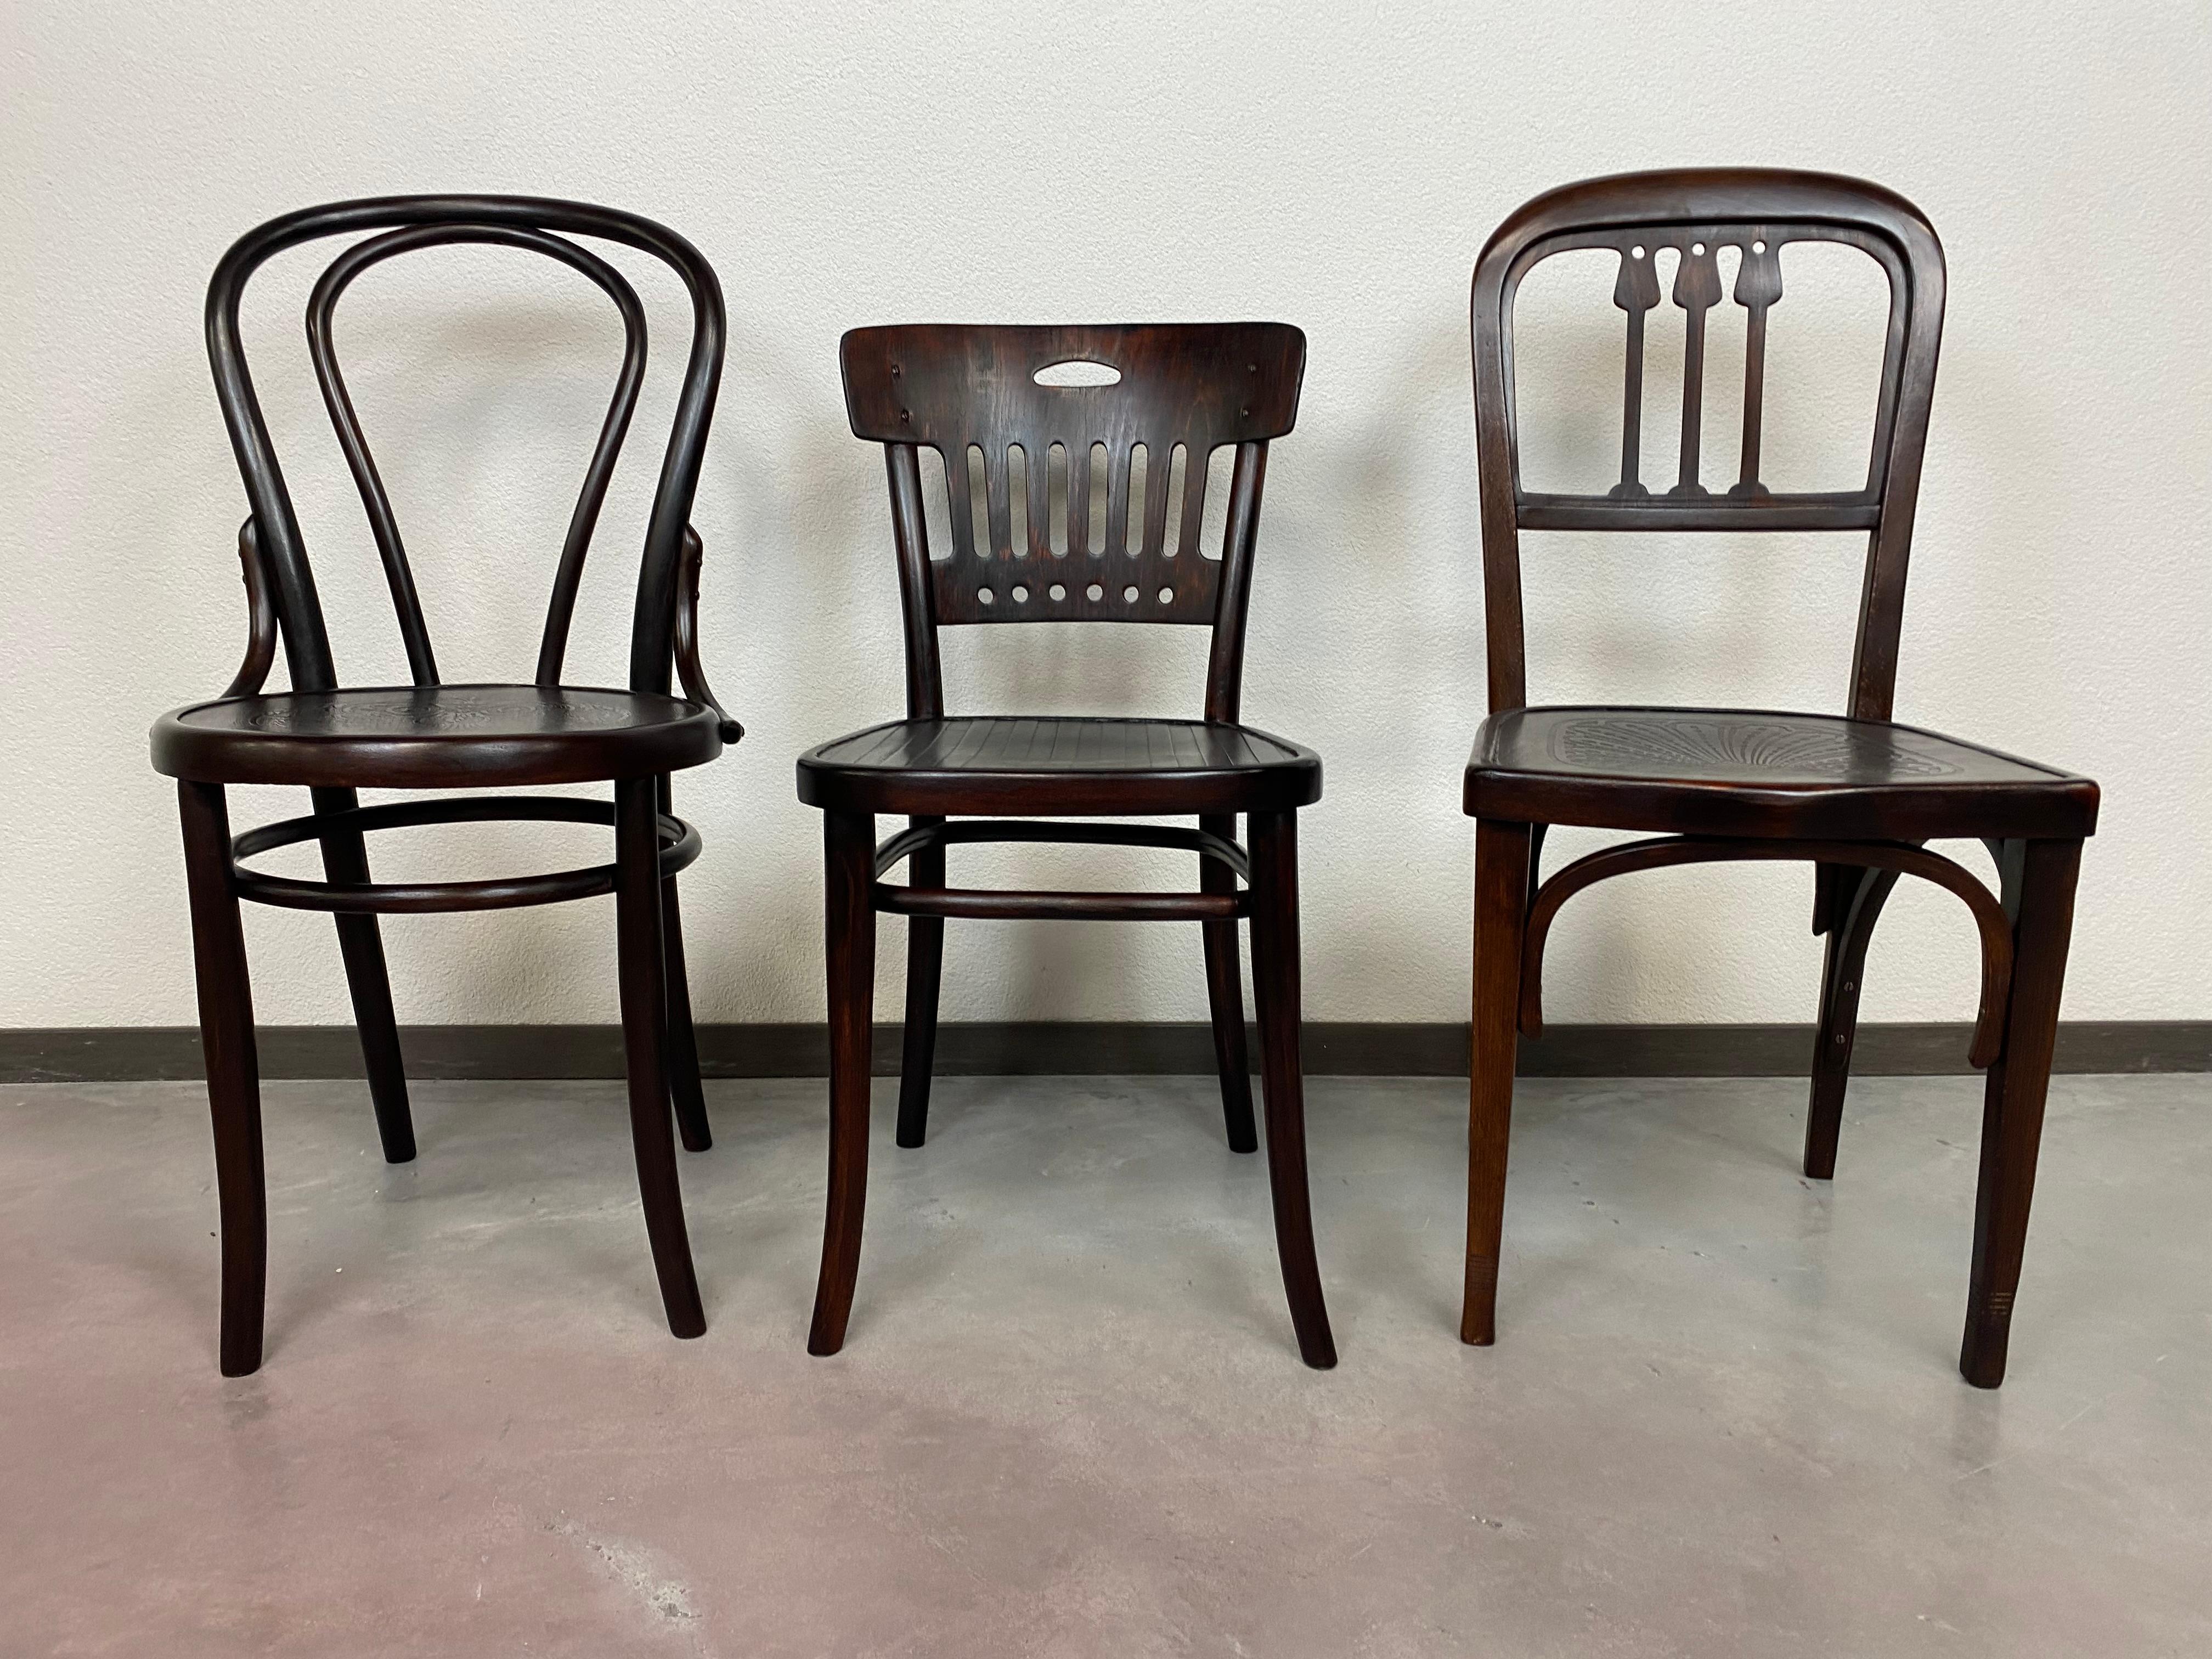 Secession dining chair no.493 by J&J Kohn. Professionally stained and repolished.